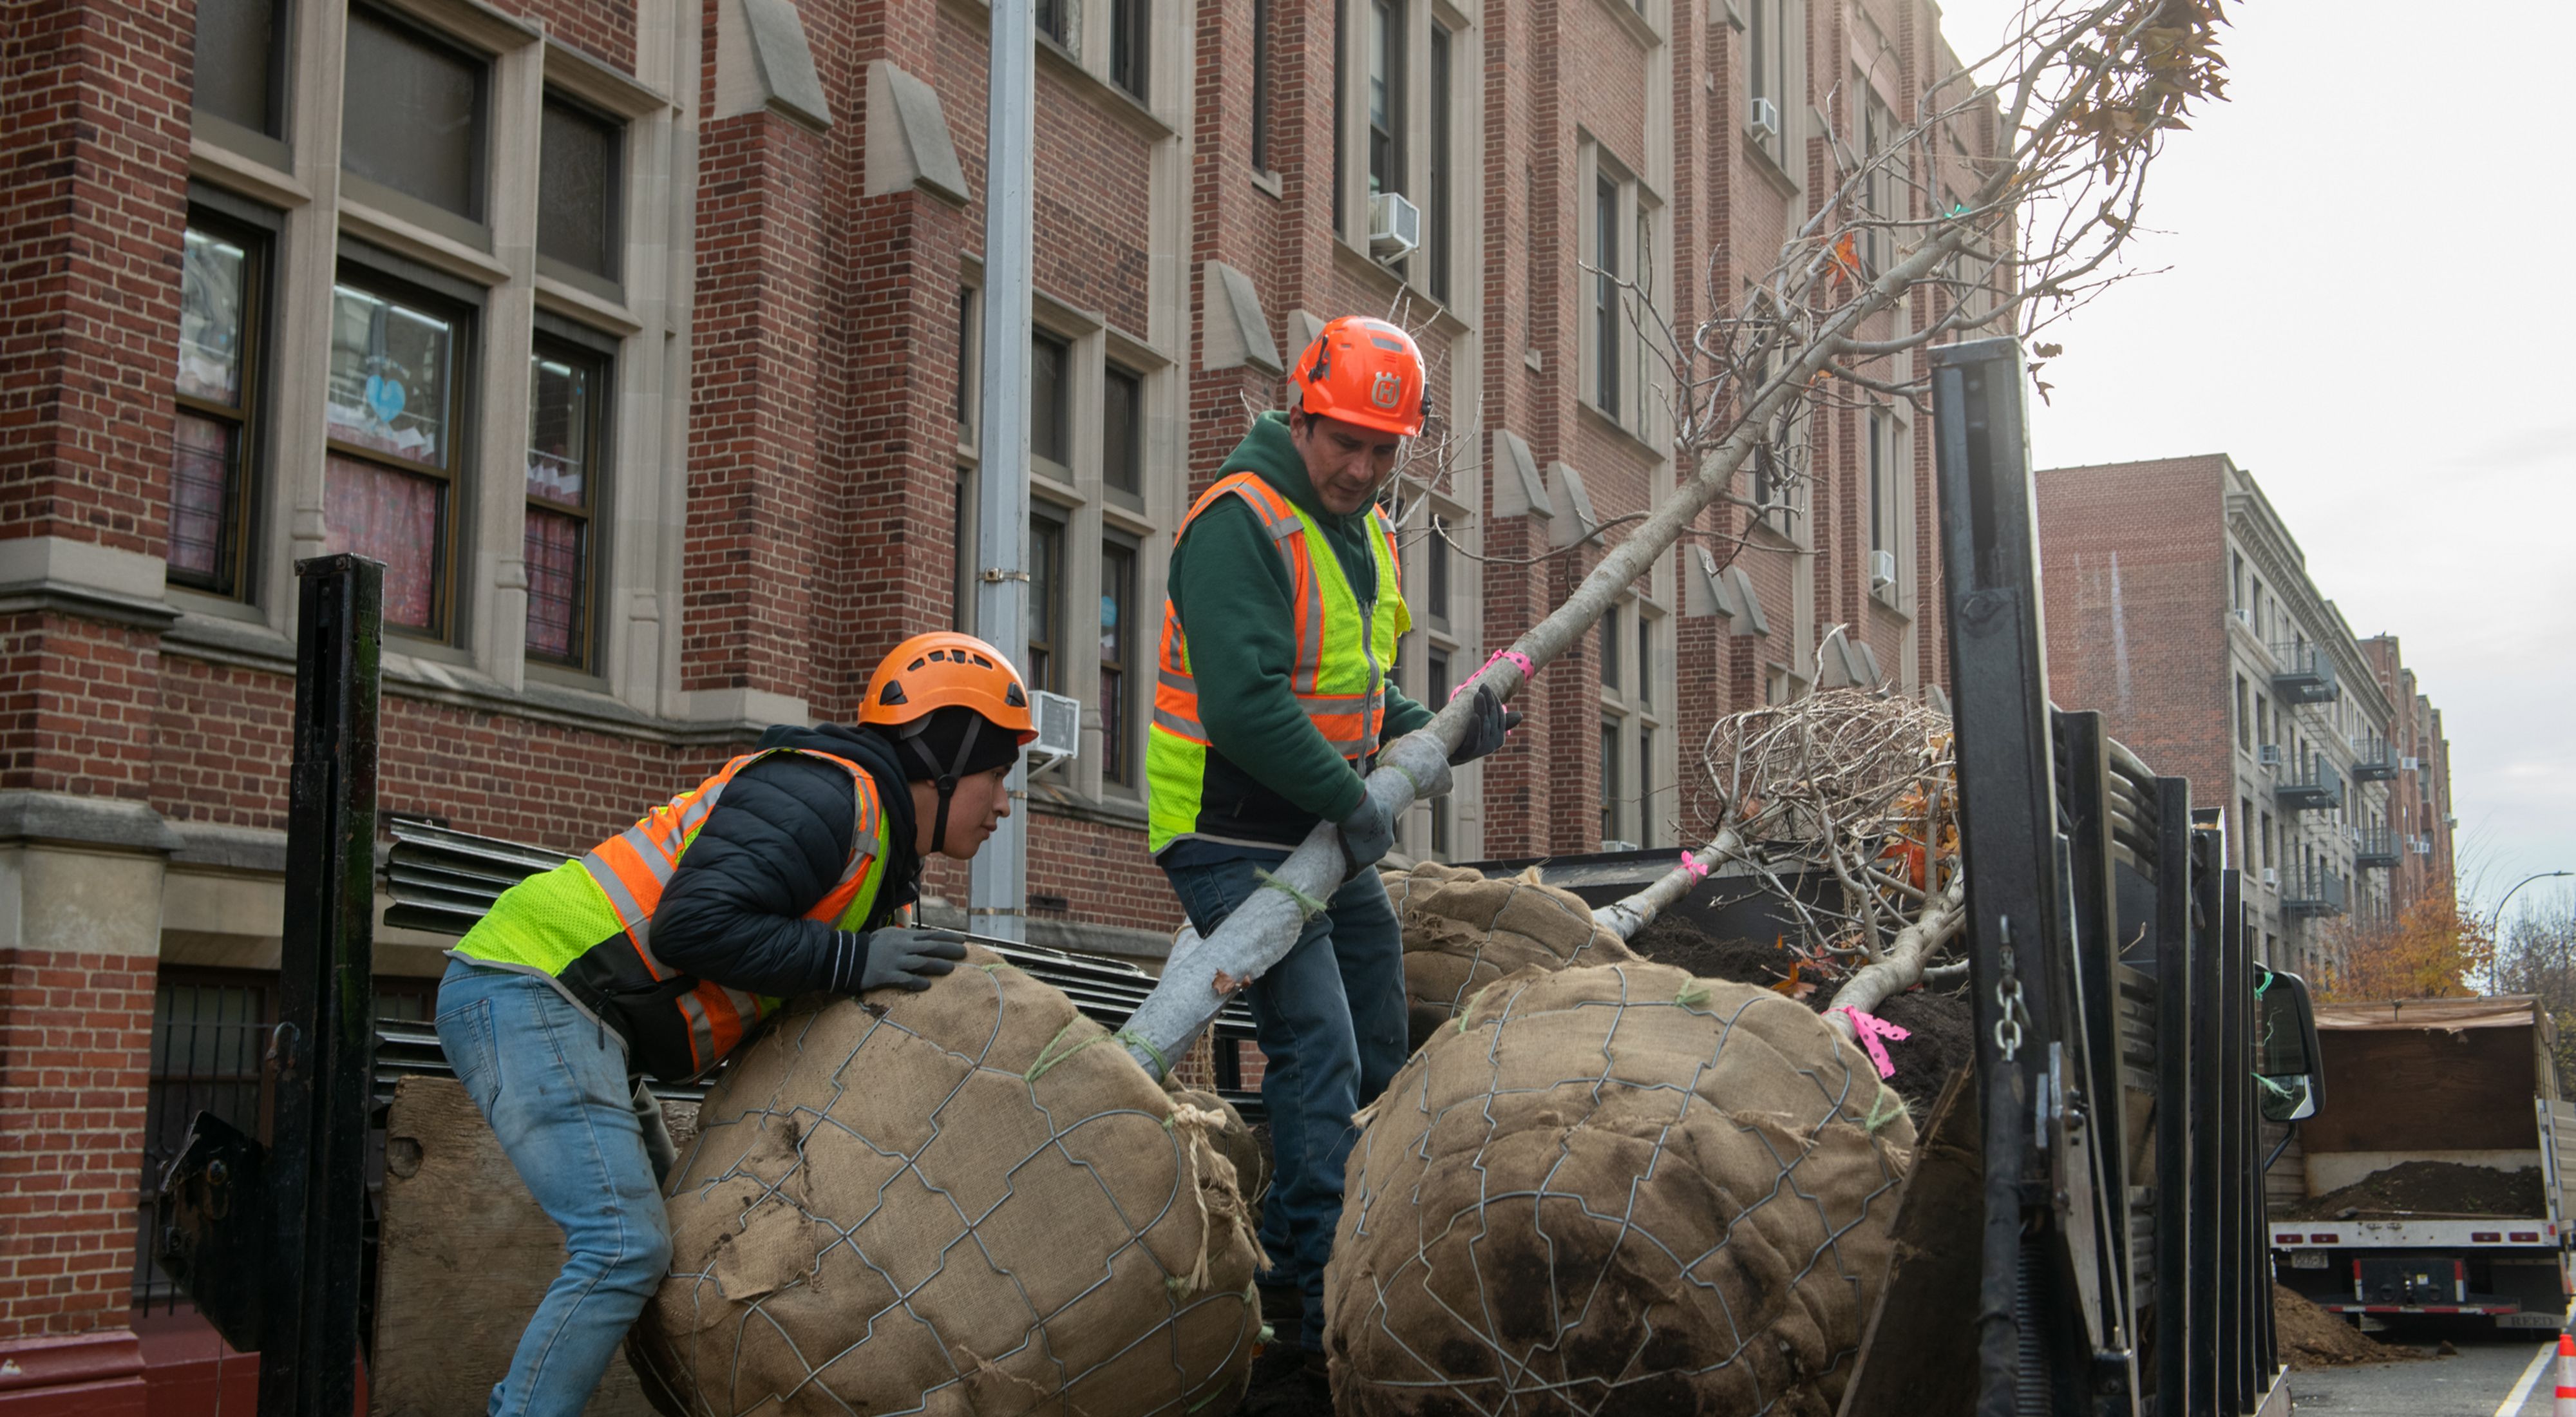 Two people wearing hard hats carrying a tree to plant in New York City .